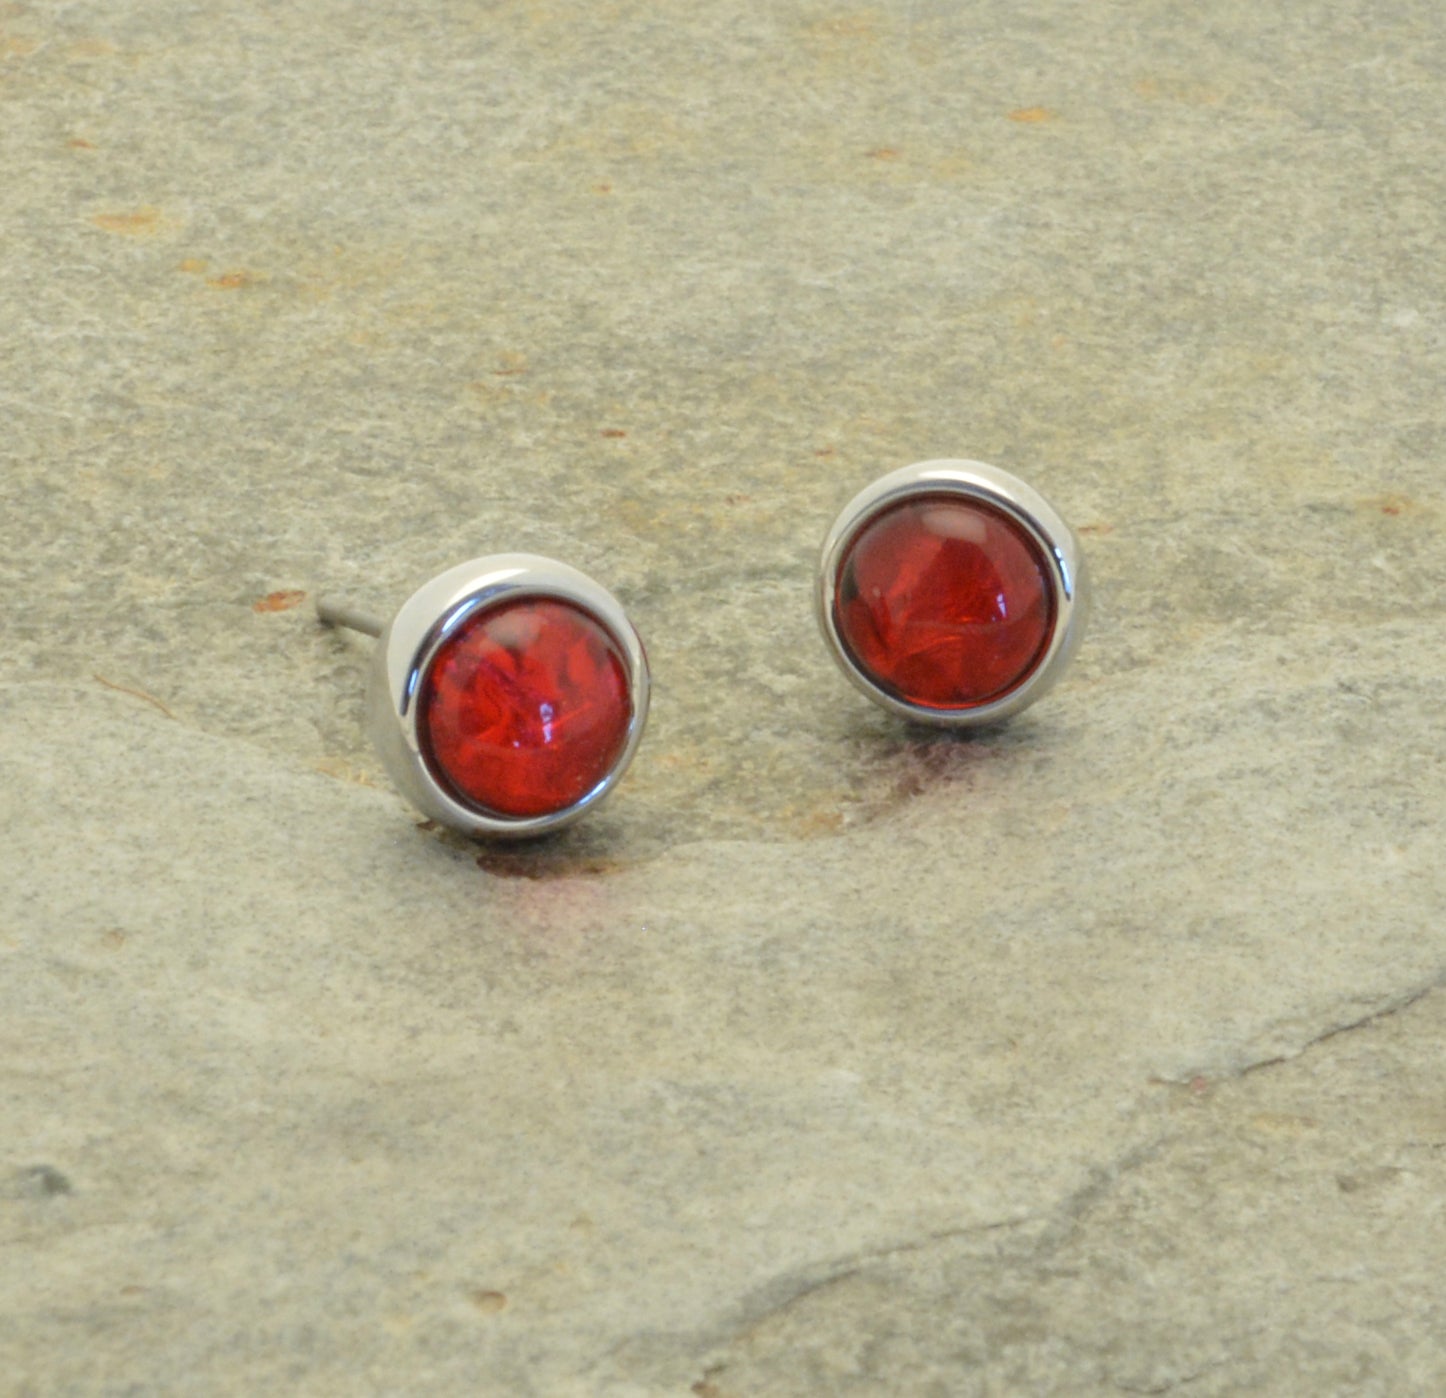 Love the classic look? Get timeless style with a modern twist with our Red Foil Resin Stud Earrings! Made with eye-catching red resin and a textured aluminum foil backing, these statement studs feature a gleaming silver surround. Elevate your look with this must-have accessory!  Approx 0.9cm in diameter, attached to posts and butterflies.